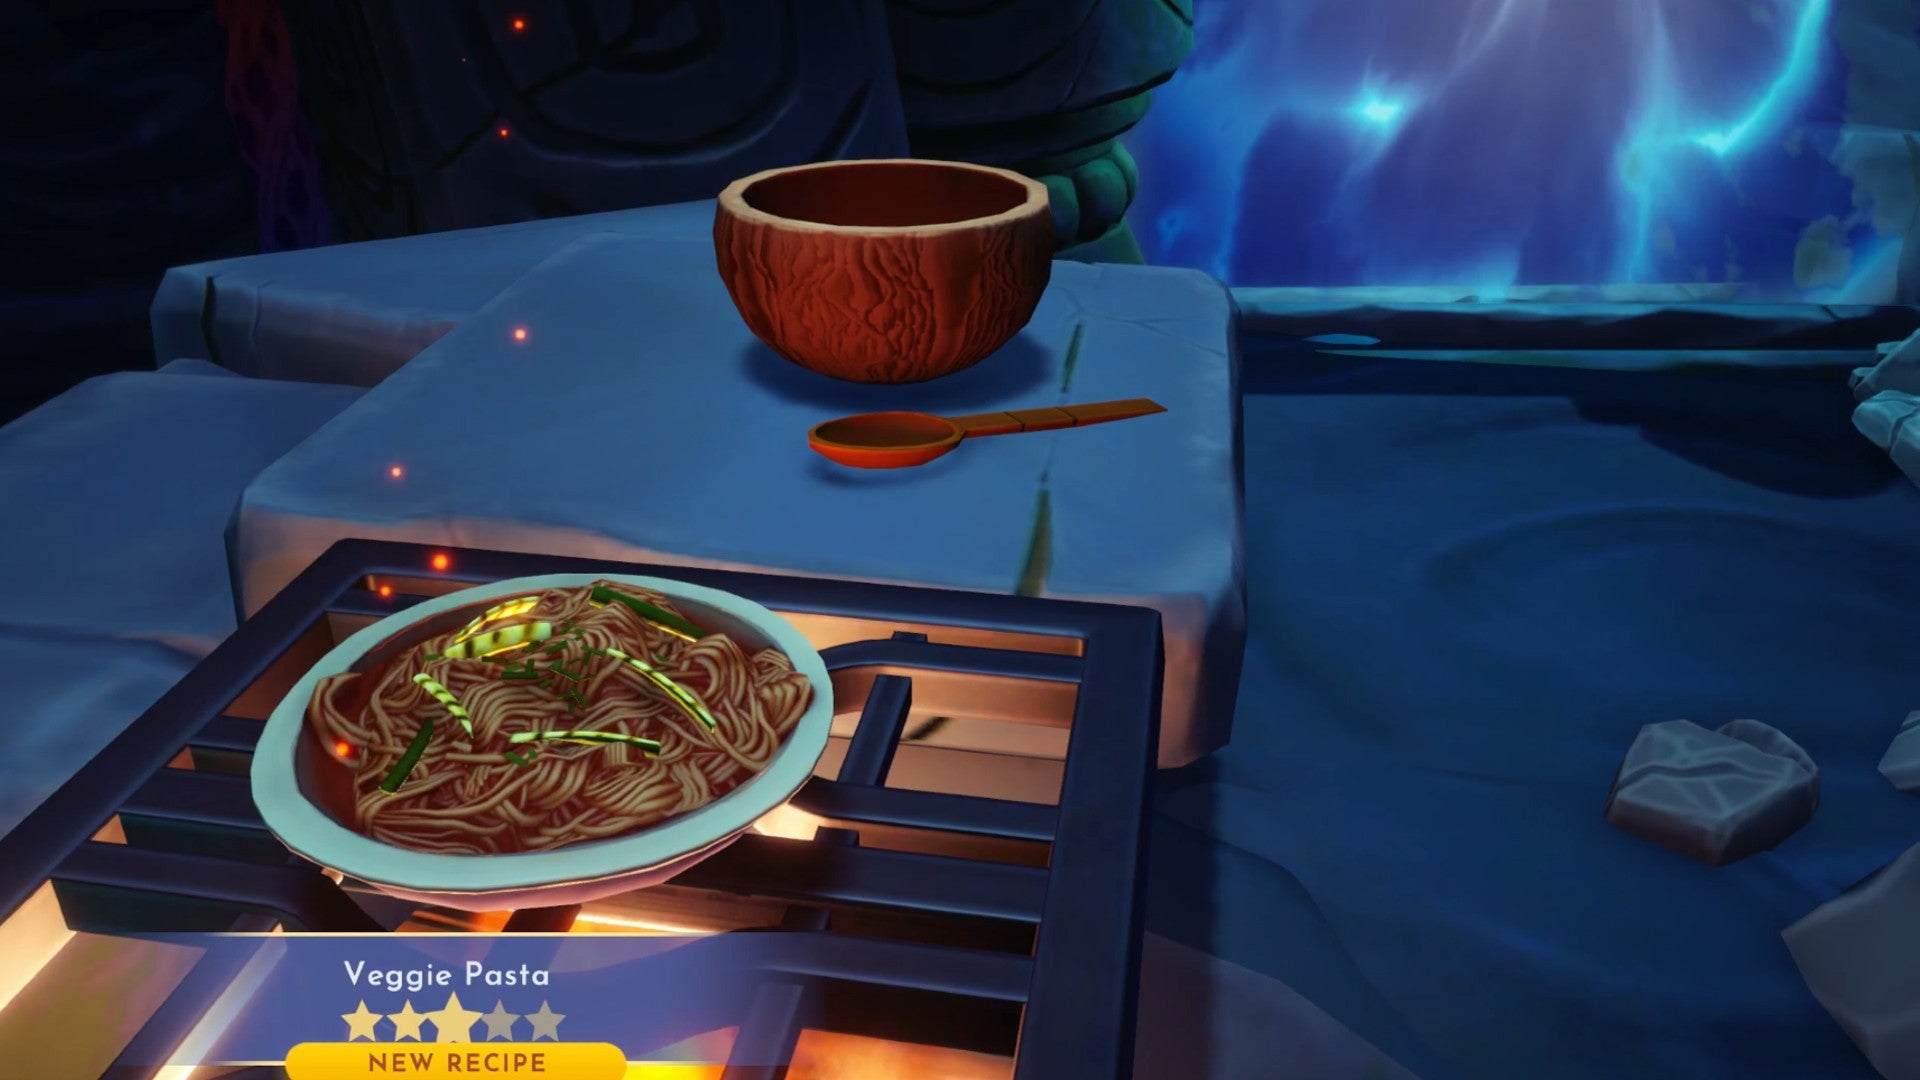 Disney Dreamlight Valley screenshot showing a cooked veggie pasta meal, which is on the stove of an oven in a dark cave.